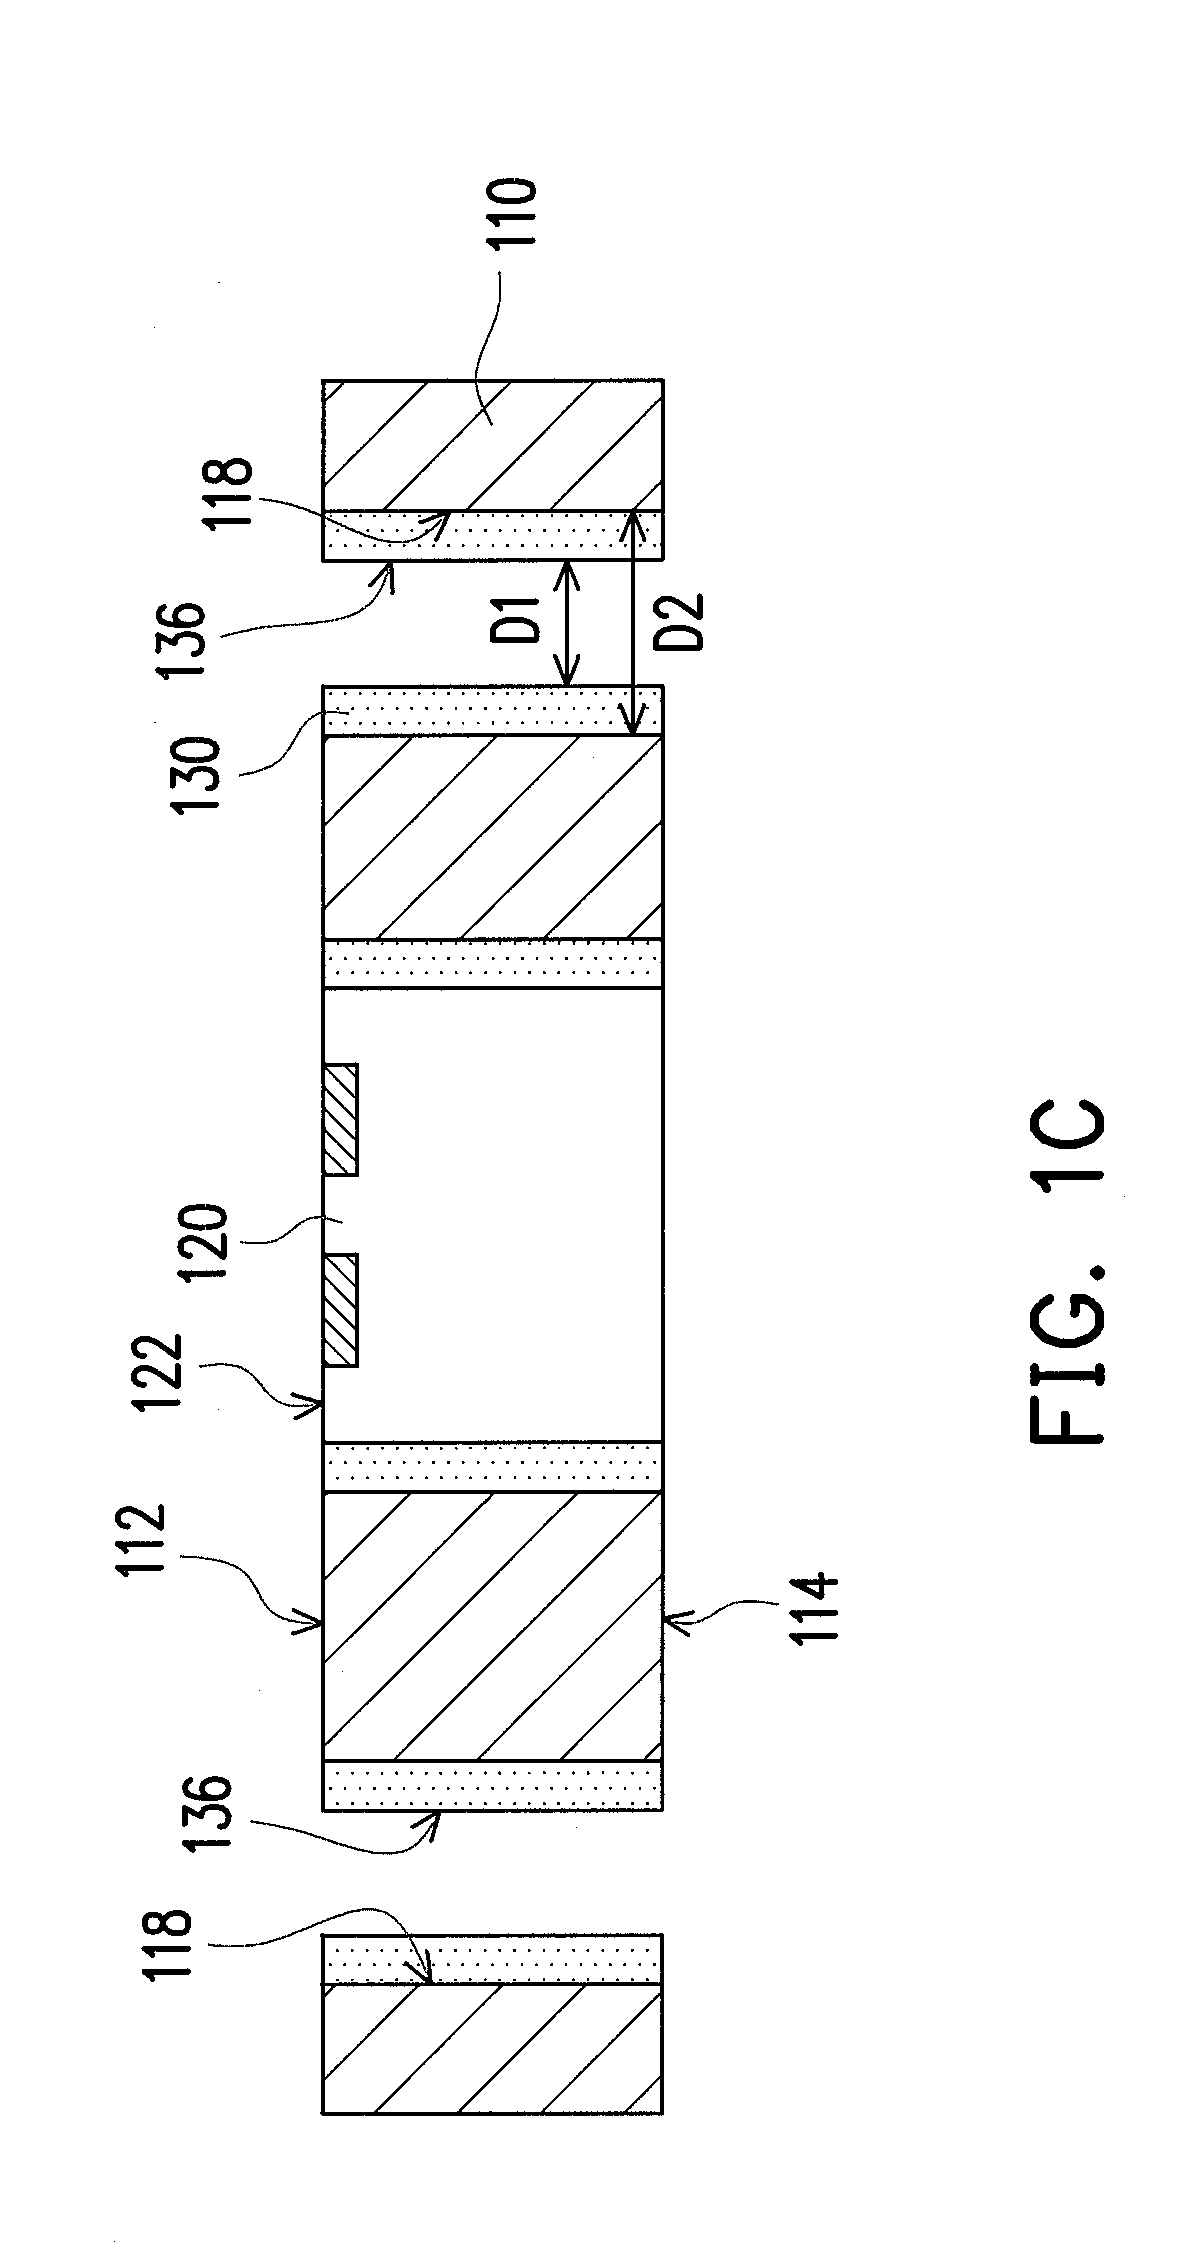 Structure and process of embedded chip package